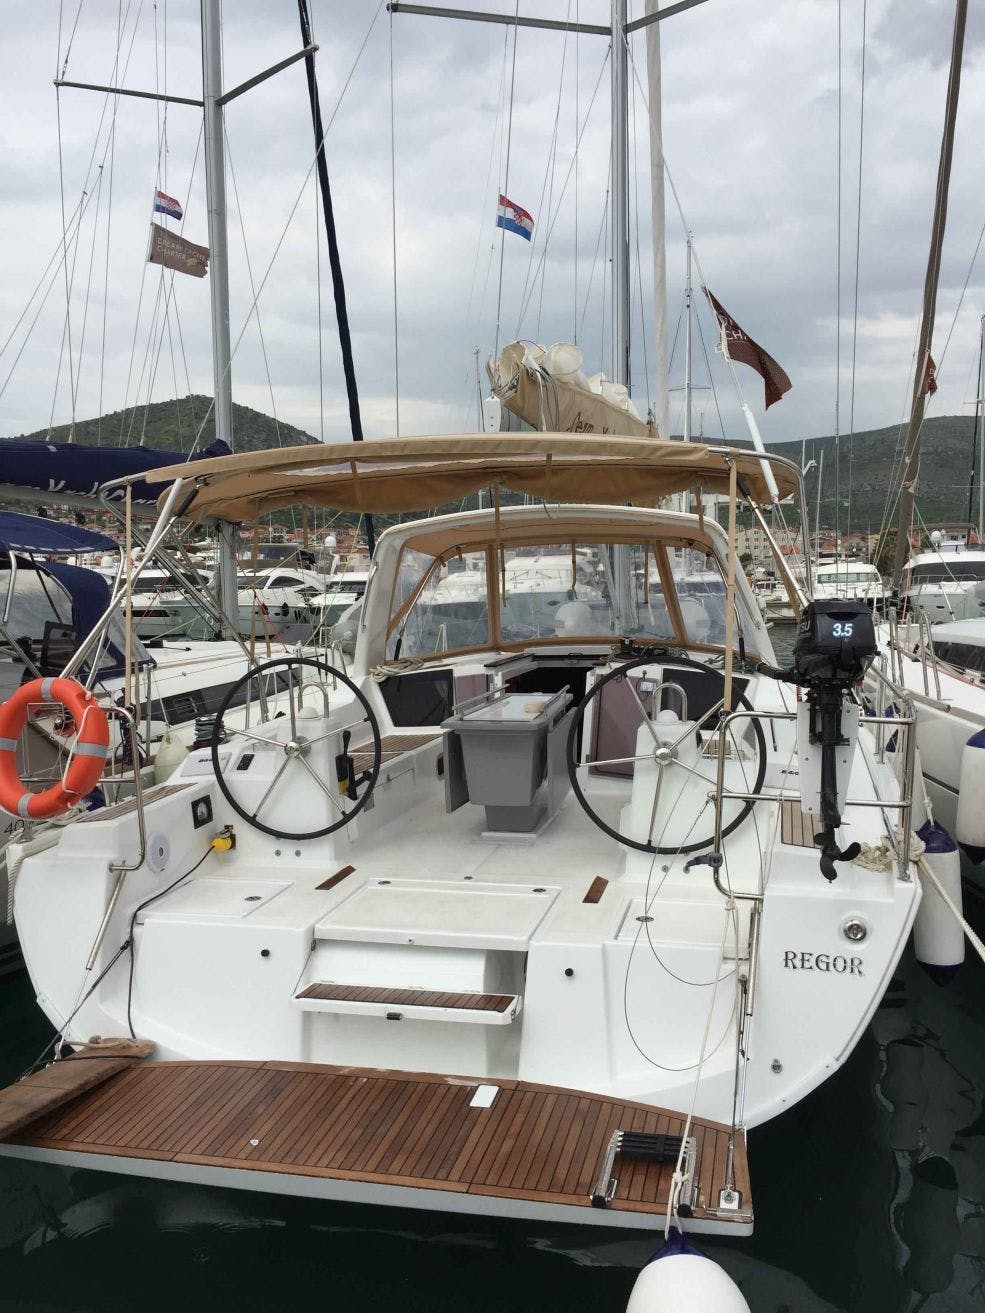 Book Oceanis 41.1 Sailing yacht for bareboat charter in Dubrovnik, Komolac, ACI Marina Dubrovnik, Dubrovnik region, Croatia with TripYacht!, picture 3